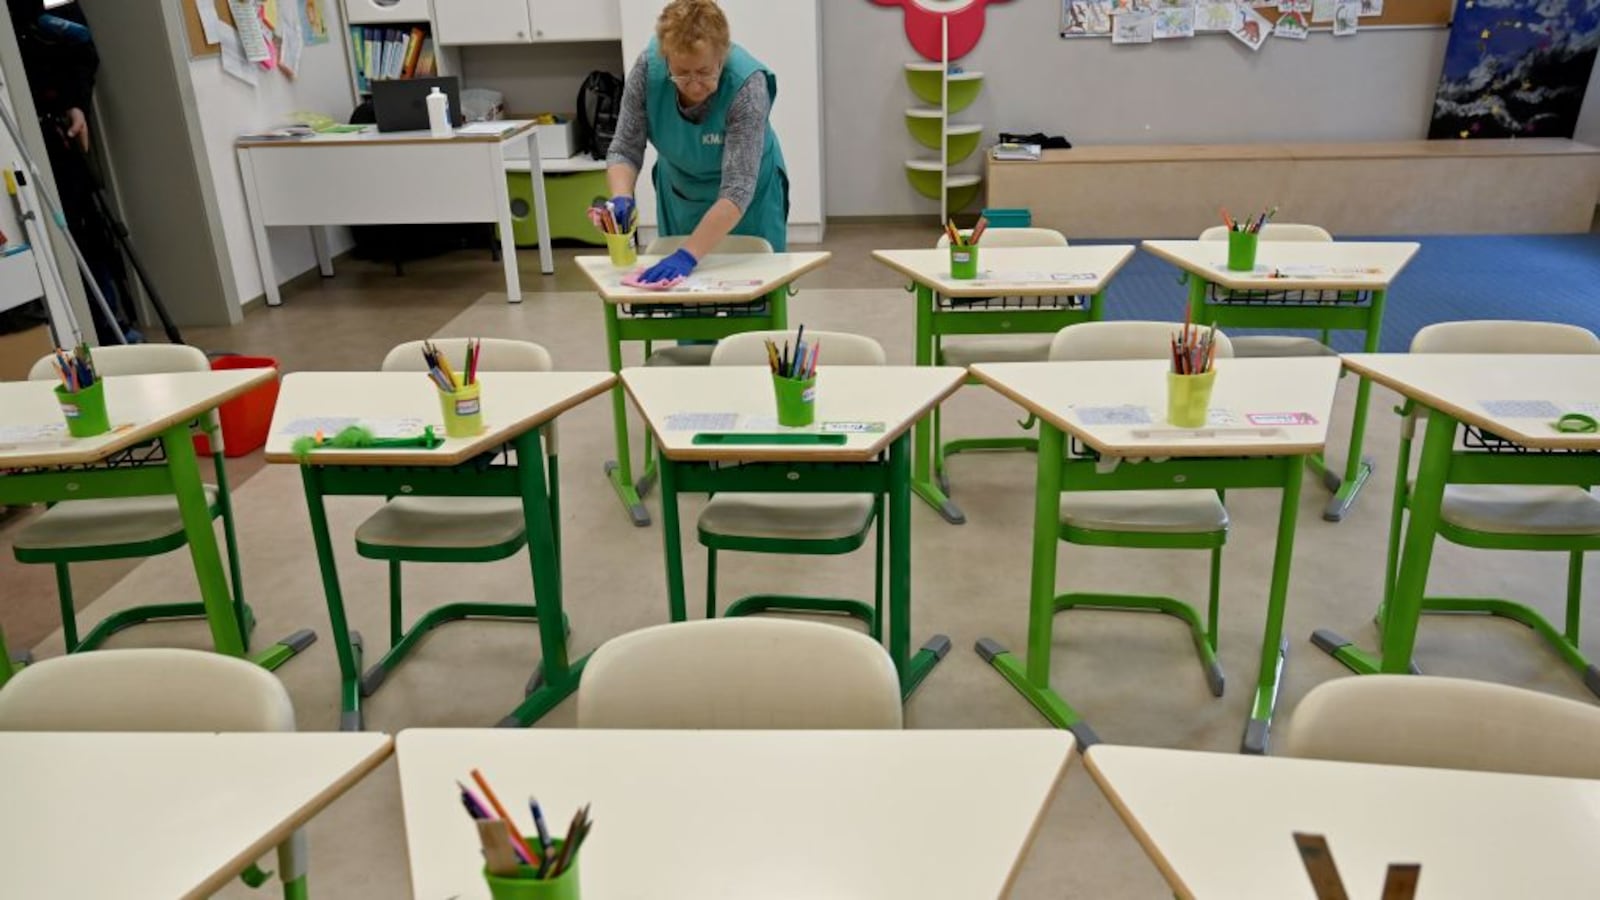 An employee disinfects a classroom of a school in the Ukrainian capital of Kiev on March 12, 2020. - Ukrainian authorities announced on March 11 they were closing schools and universities across the country for three weeks to prevent the spread of the novel coronavirus.